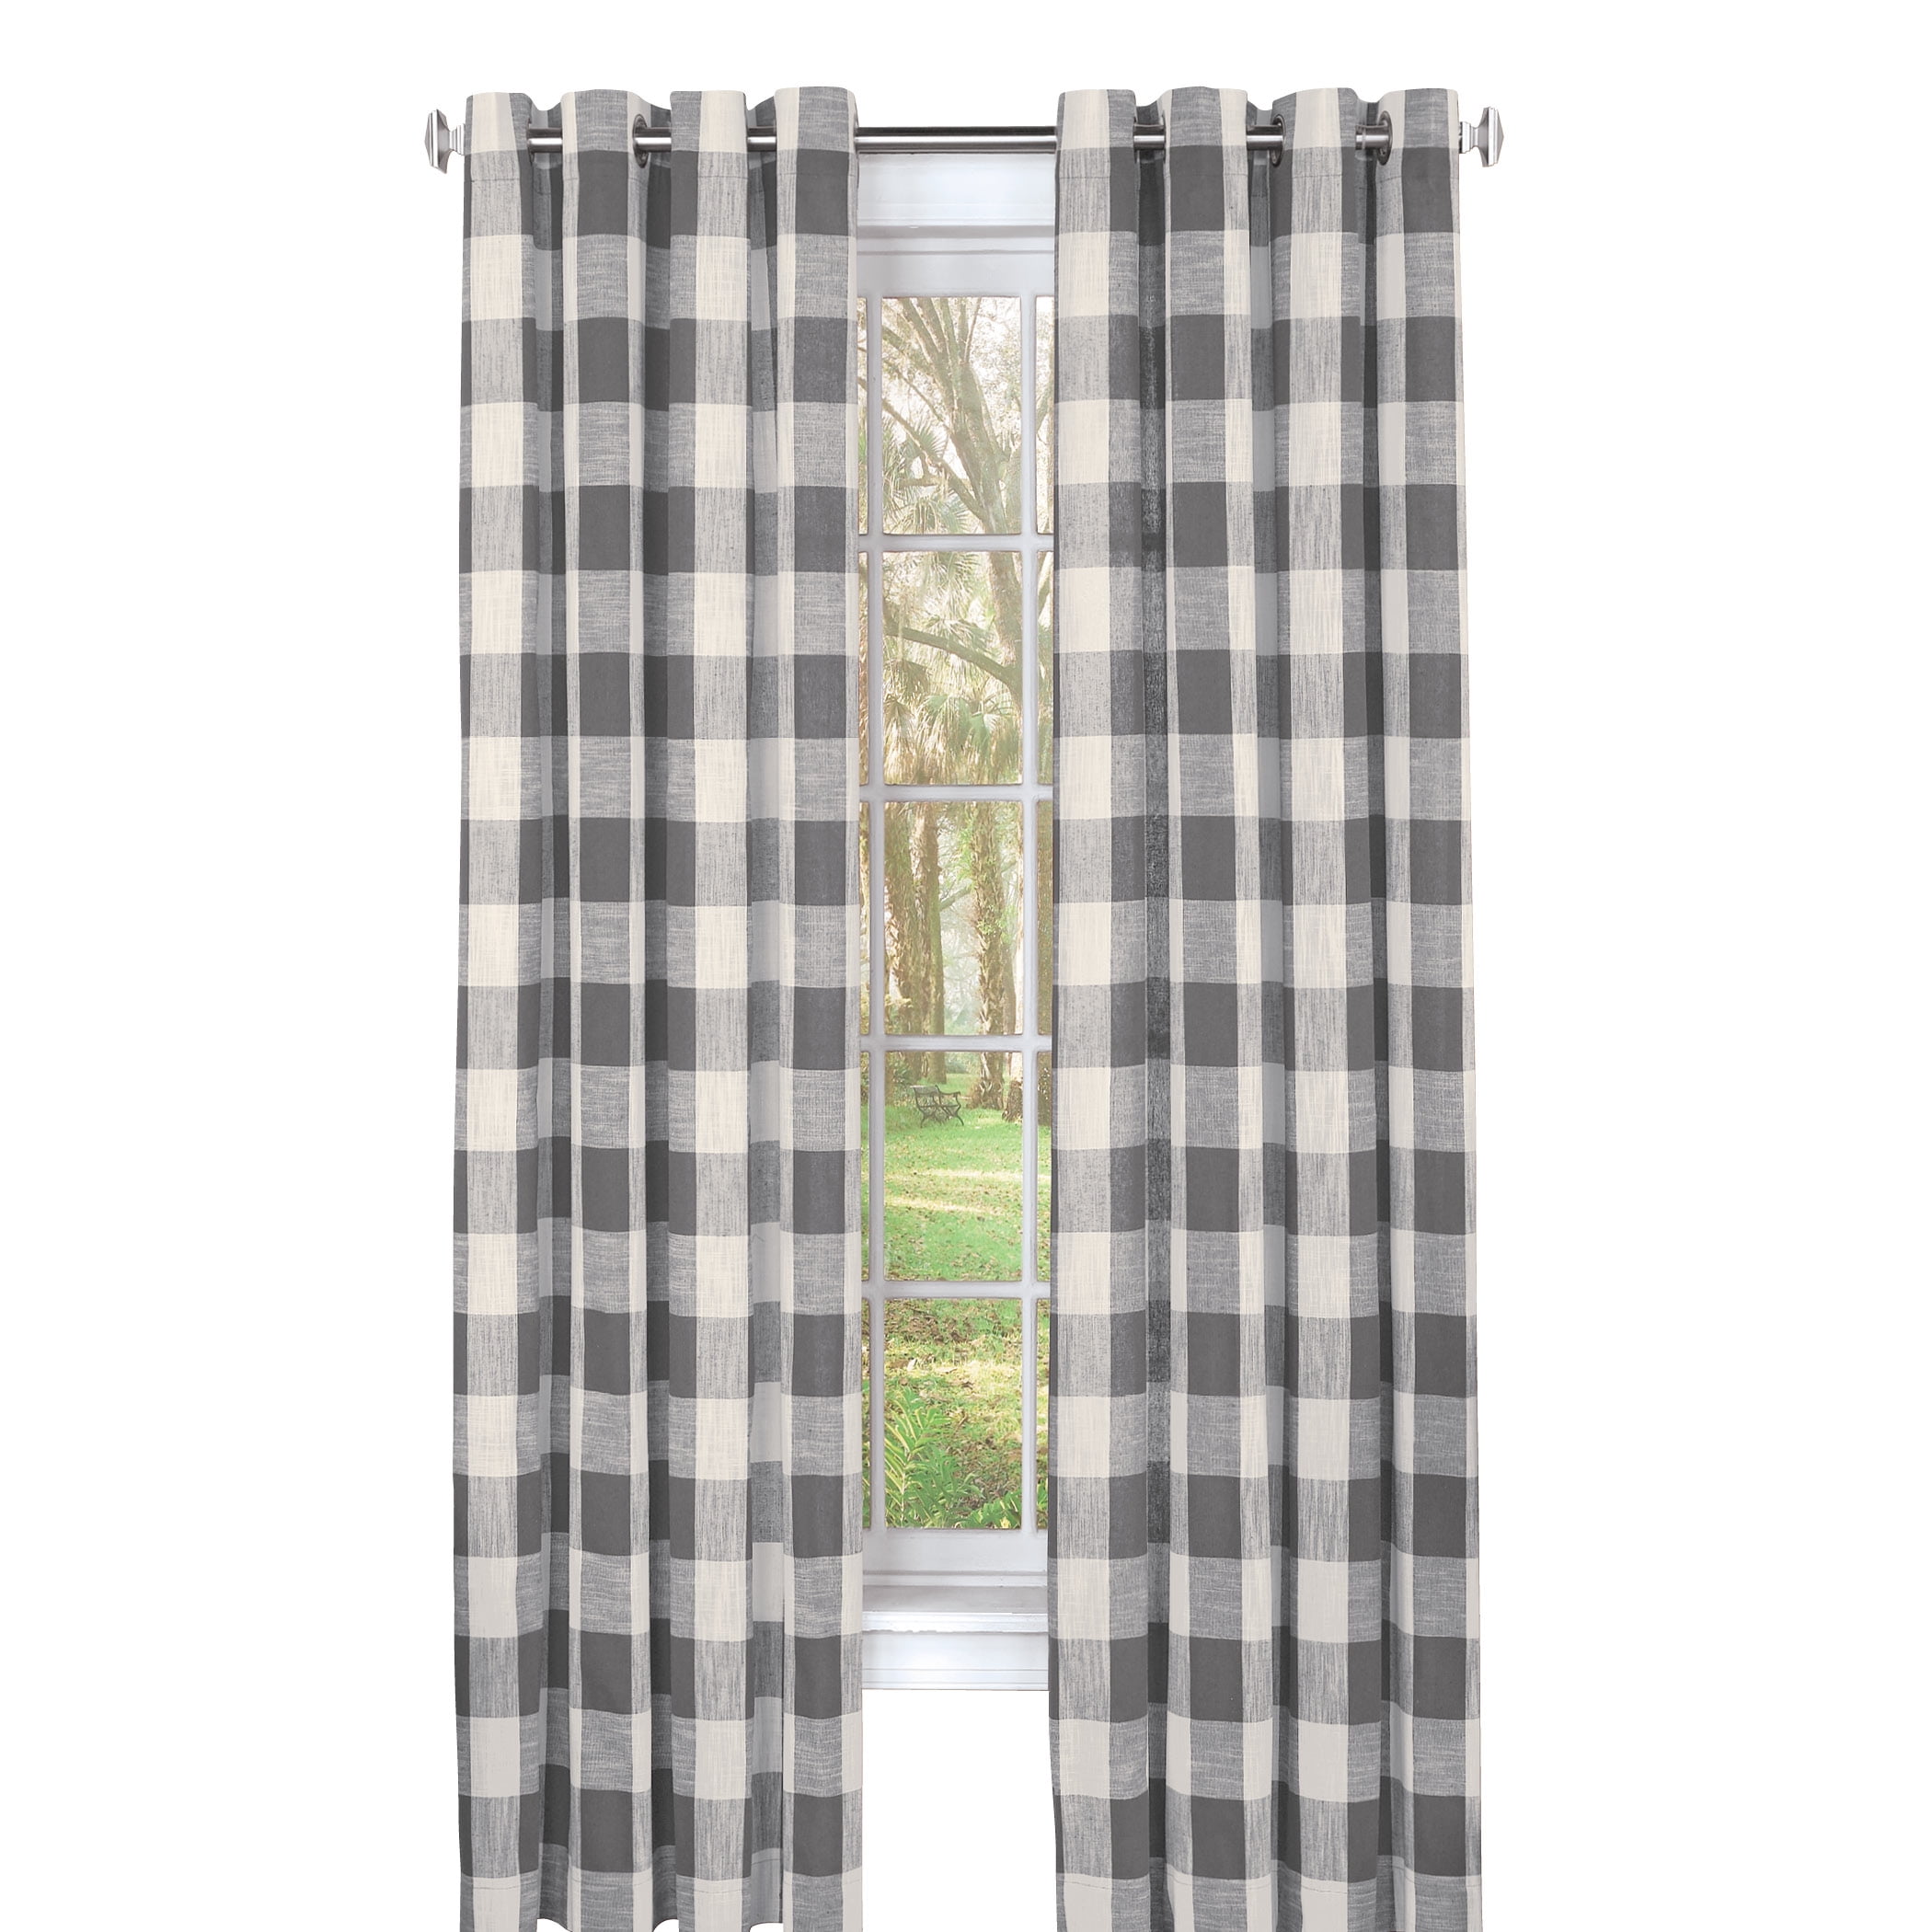 Lorraine Courtyard Plaid Woven Curtain Panel with Grommets Gray 63" length 